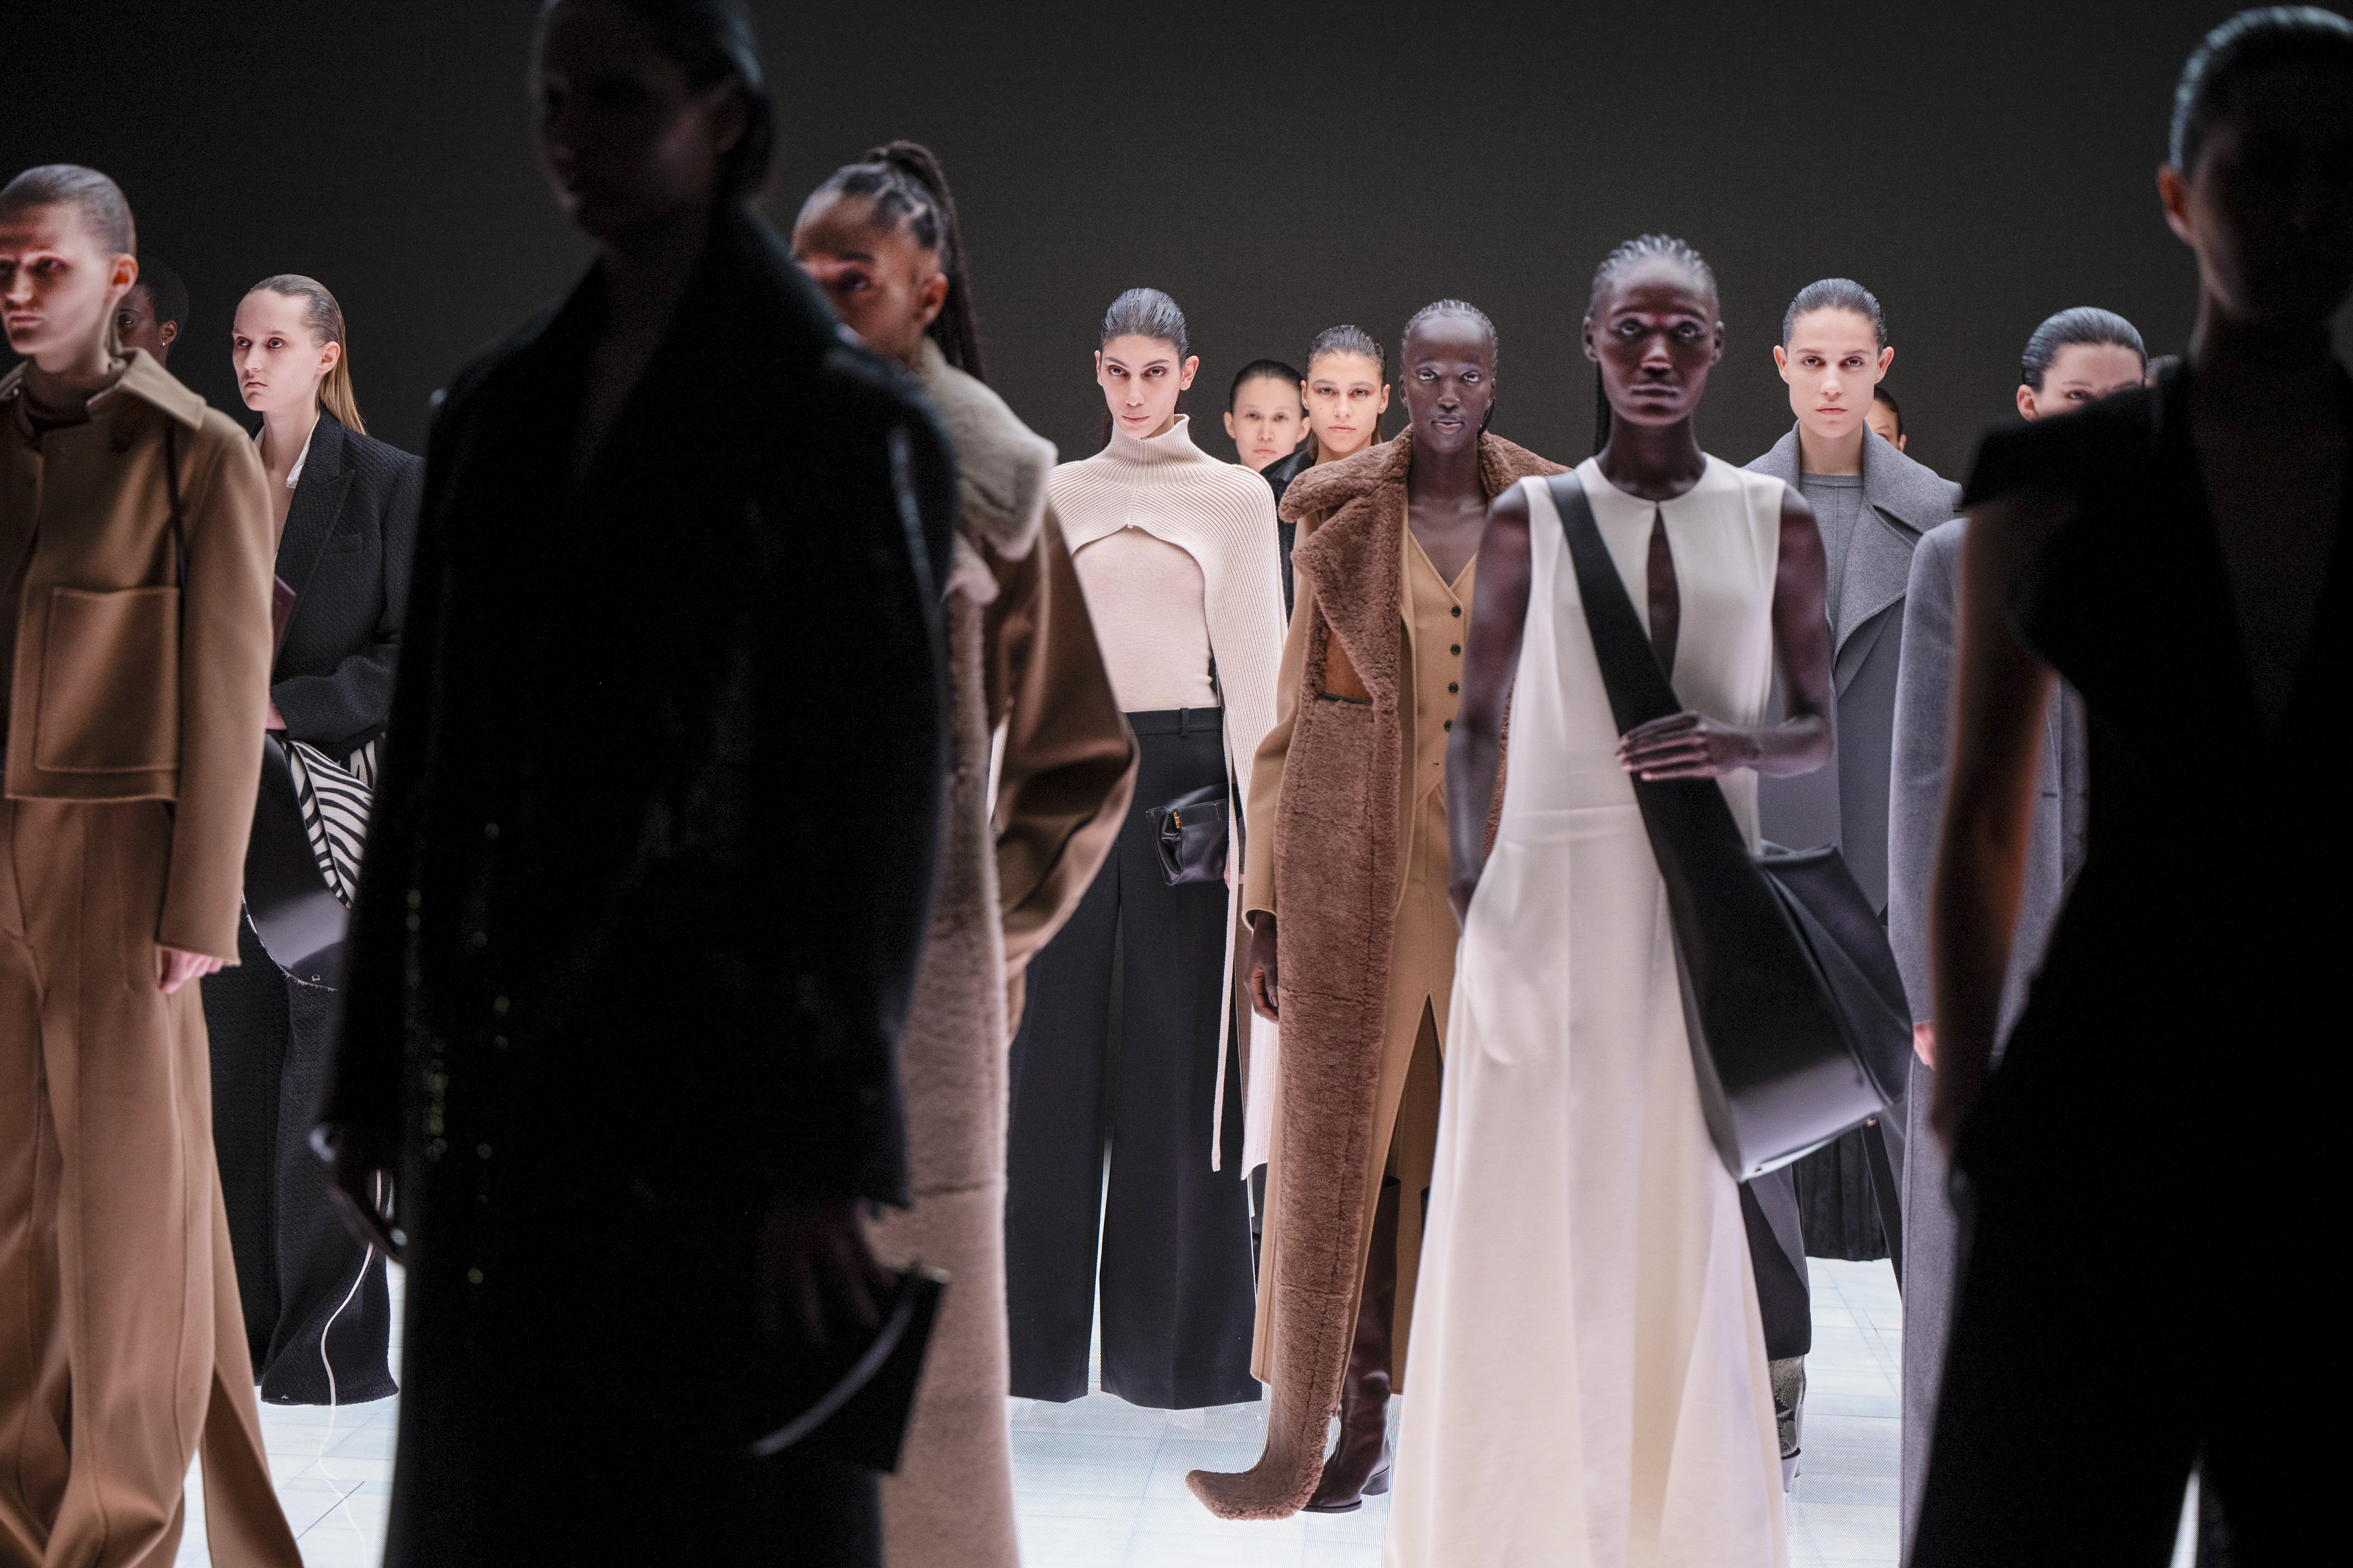 View the Official NYFW September 2022 Schedule, News